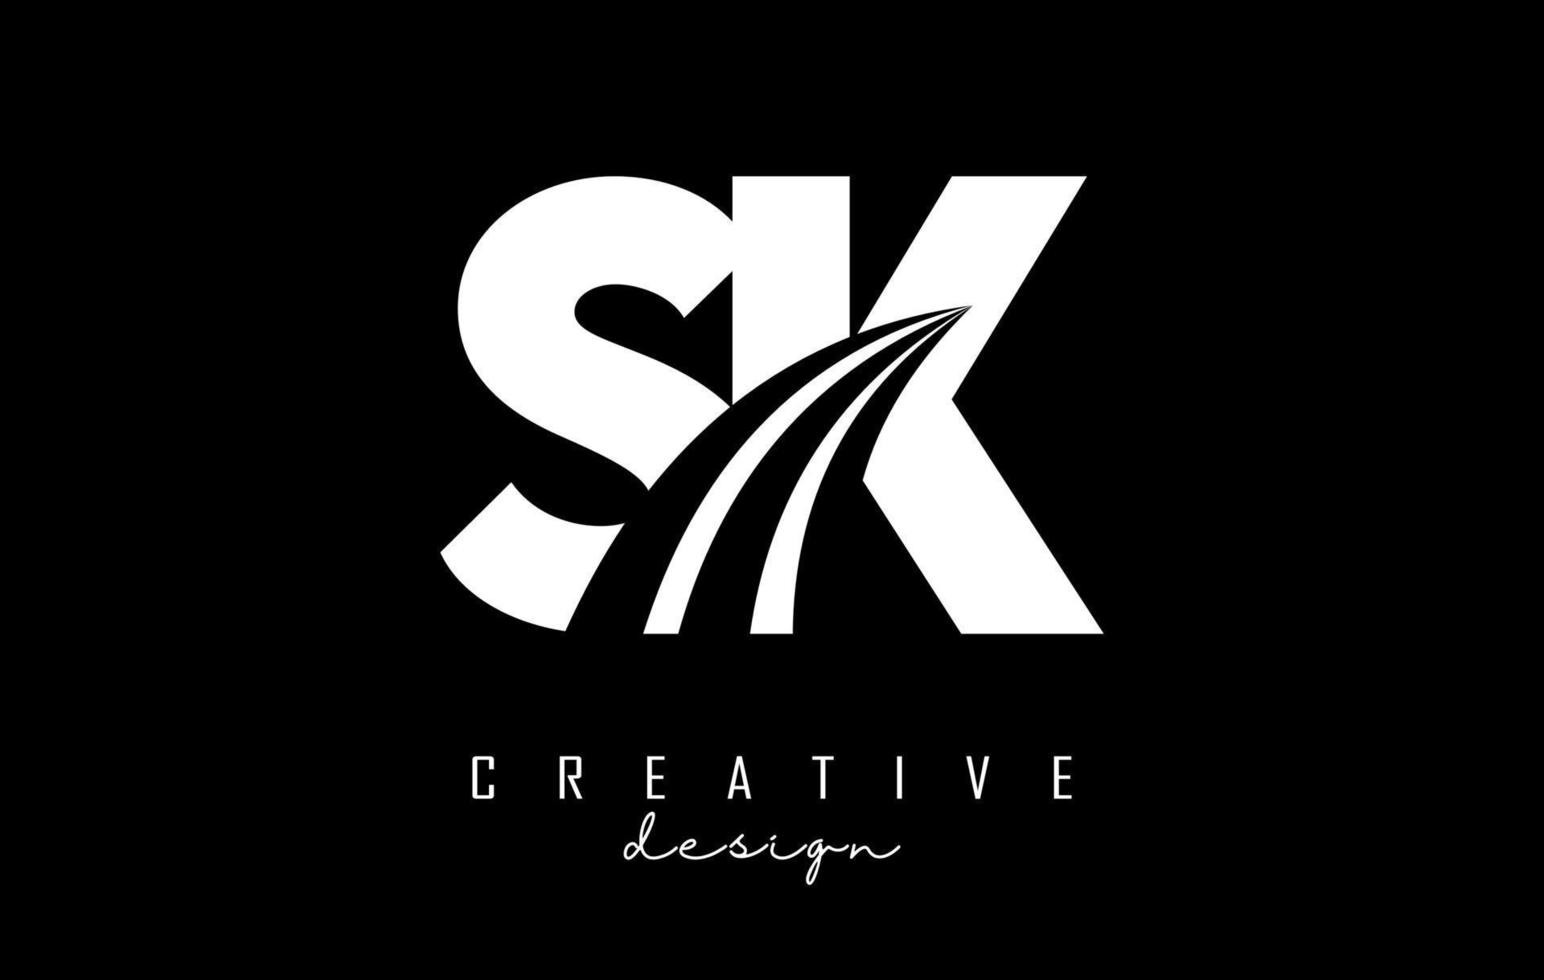 Creative white letters SK s k logo with leading lines and road concept design. Letters with geometric design. vector